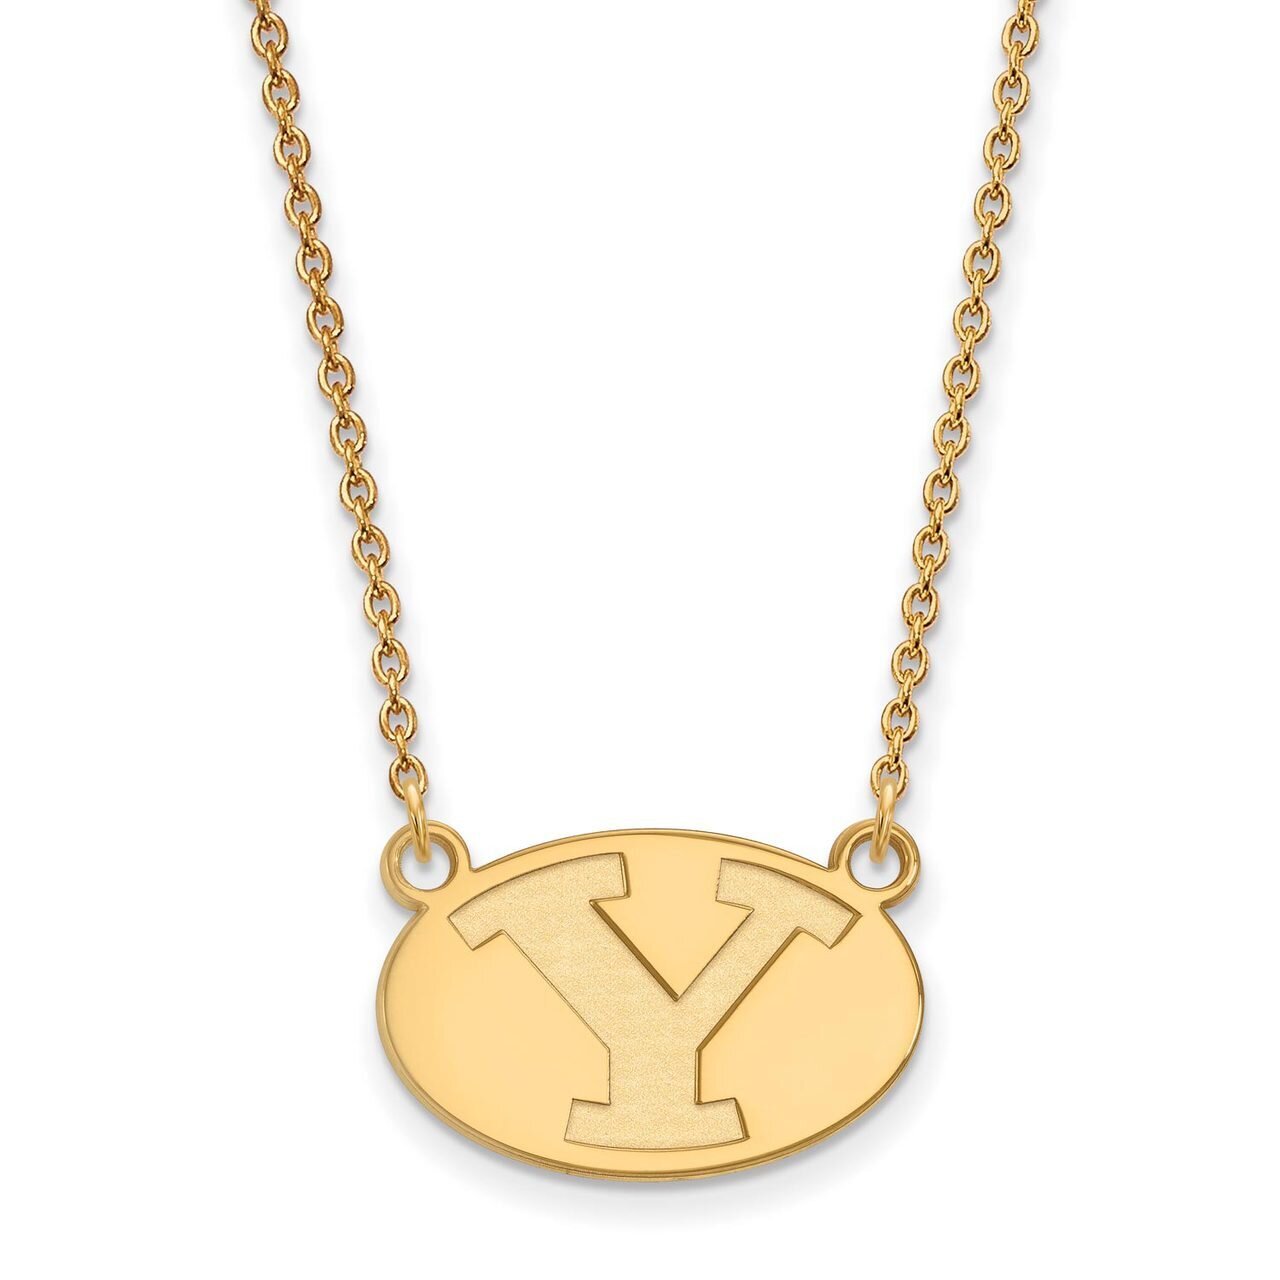 Brigham Young University Small Pendant with Chain Necklace 14k Yellow Gold 4Y009BYU-18